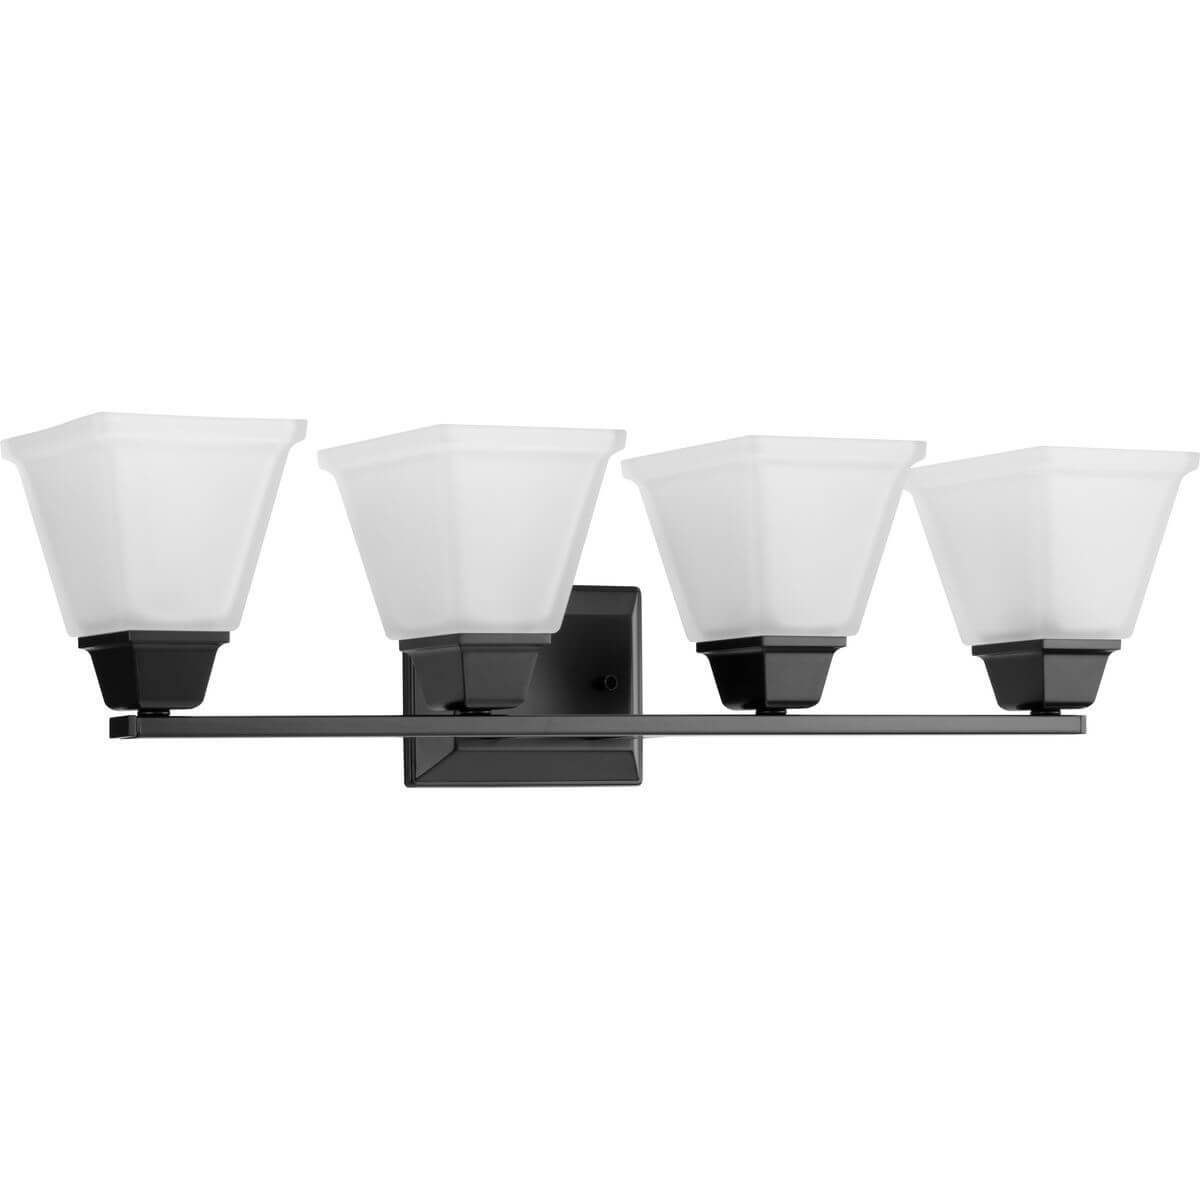 Progress Lighting Clifton Heights 4 Light 32 inch Bath Vanity Light in Matte Black with Etched Glass P300161-31M